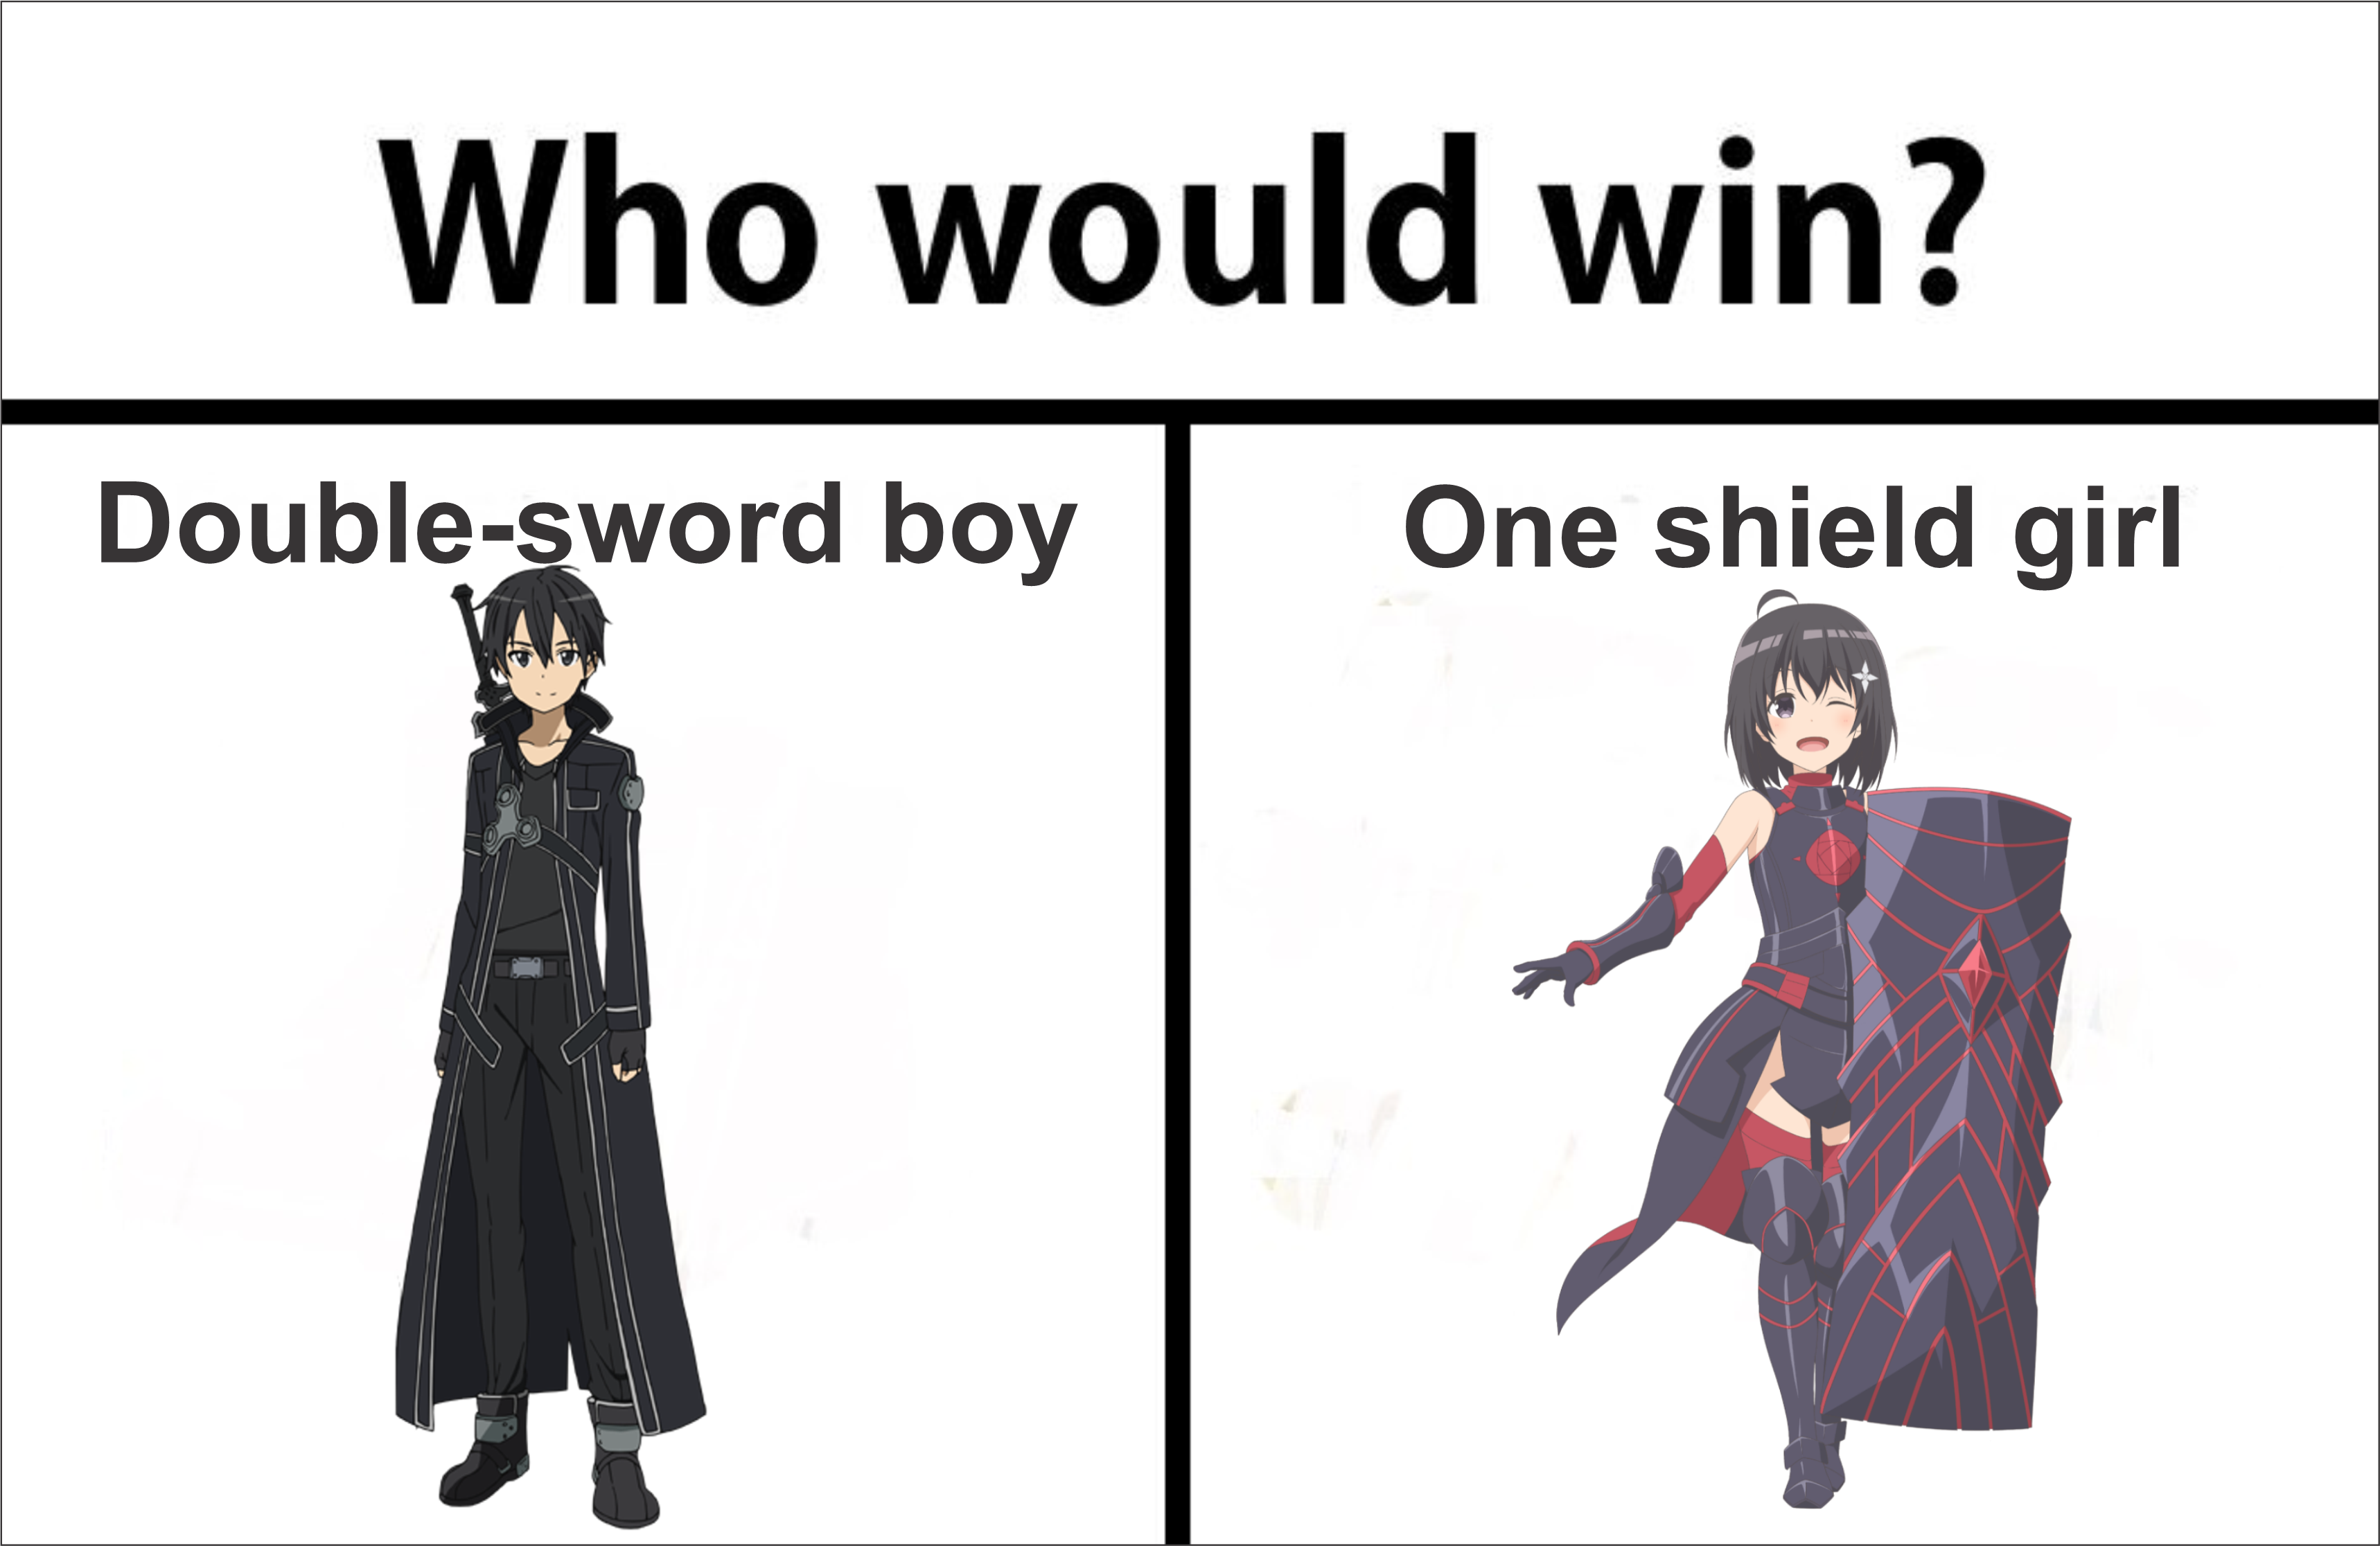 Ladies and gentlemen, place your bets!